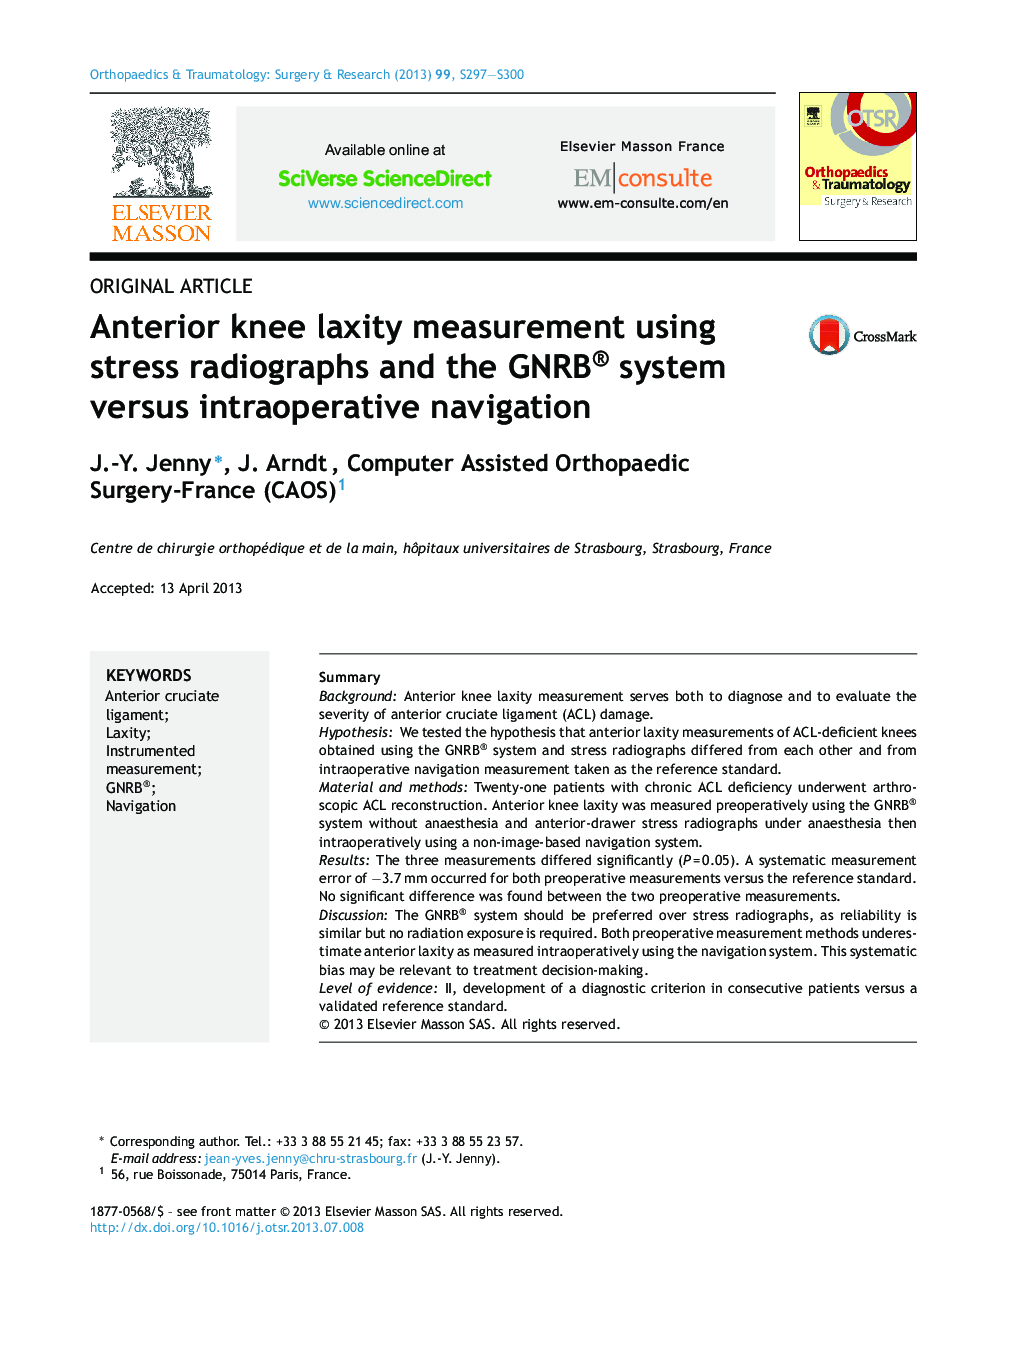 Anterior knee laxity measurement using stress radiographs and the GNRB® system versus intraoperative navigation